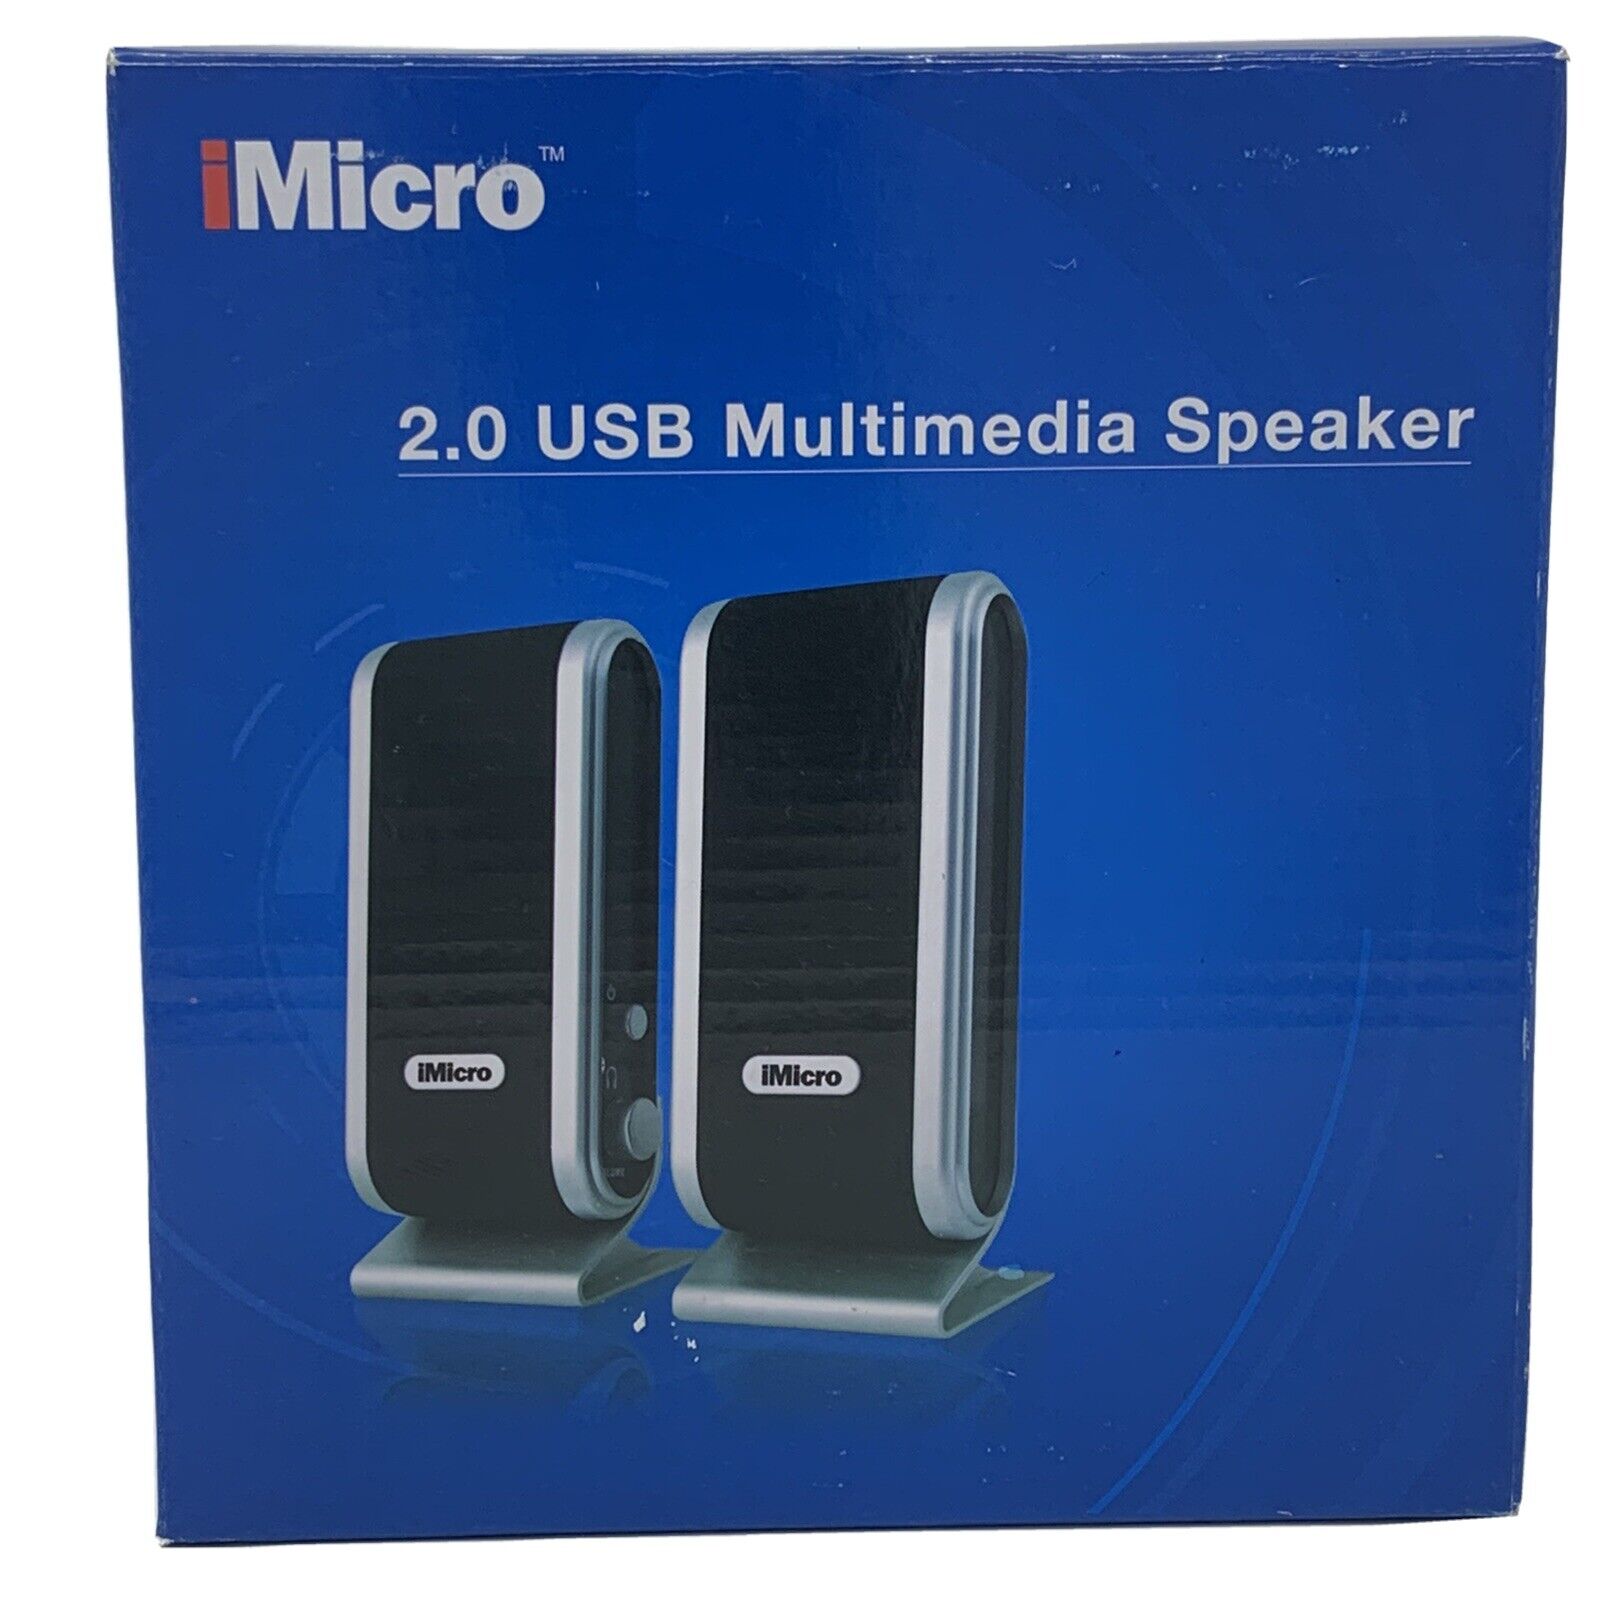 USB 2.0 Wired Channel Multimedia Speaker System iMicro SP-IMD168B 